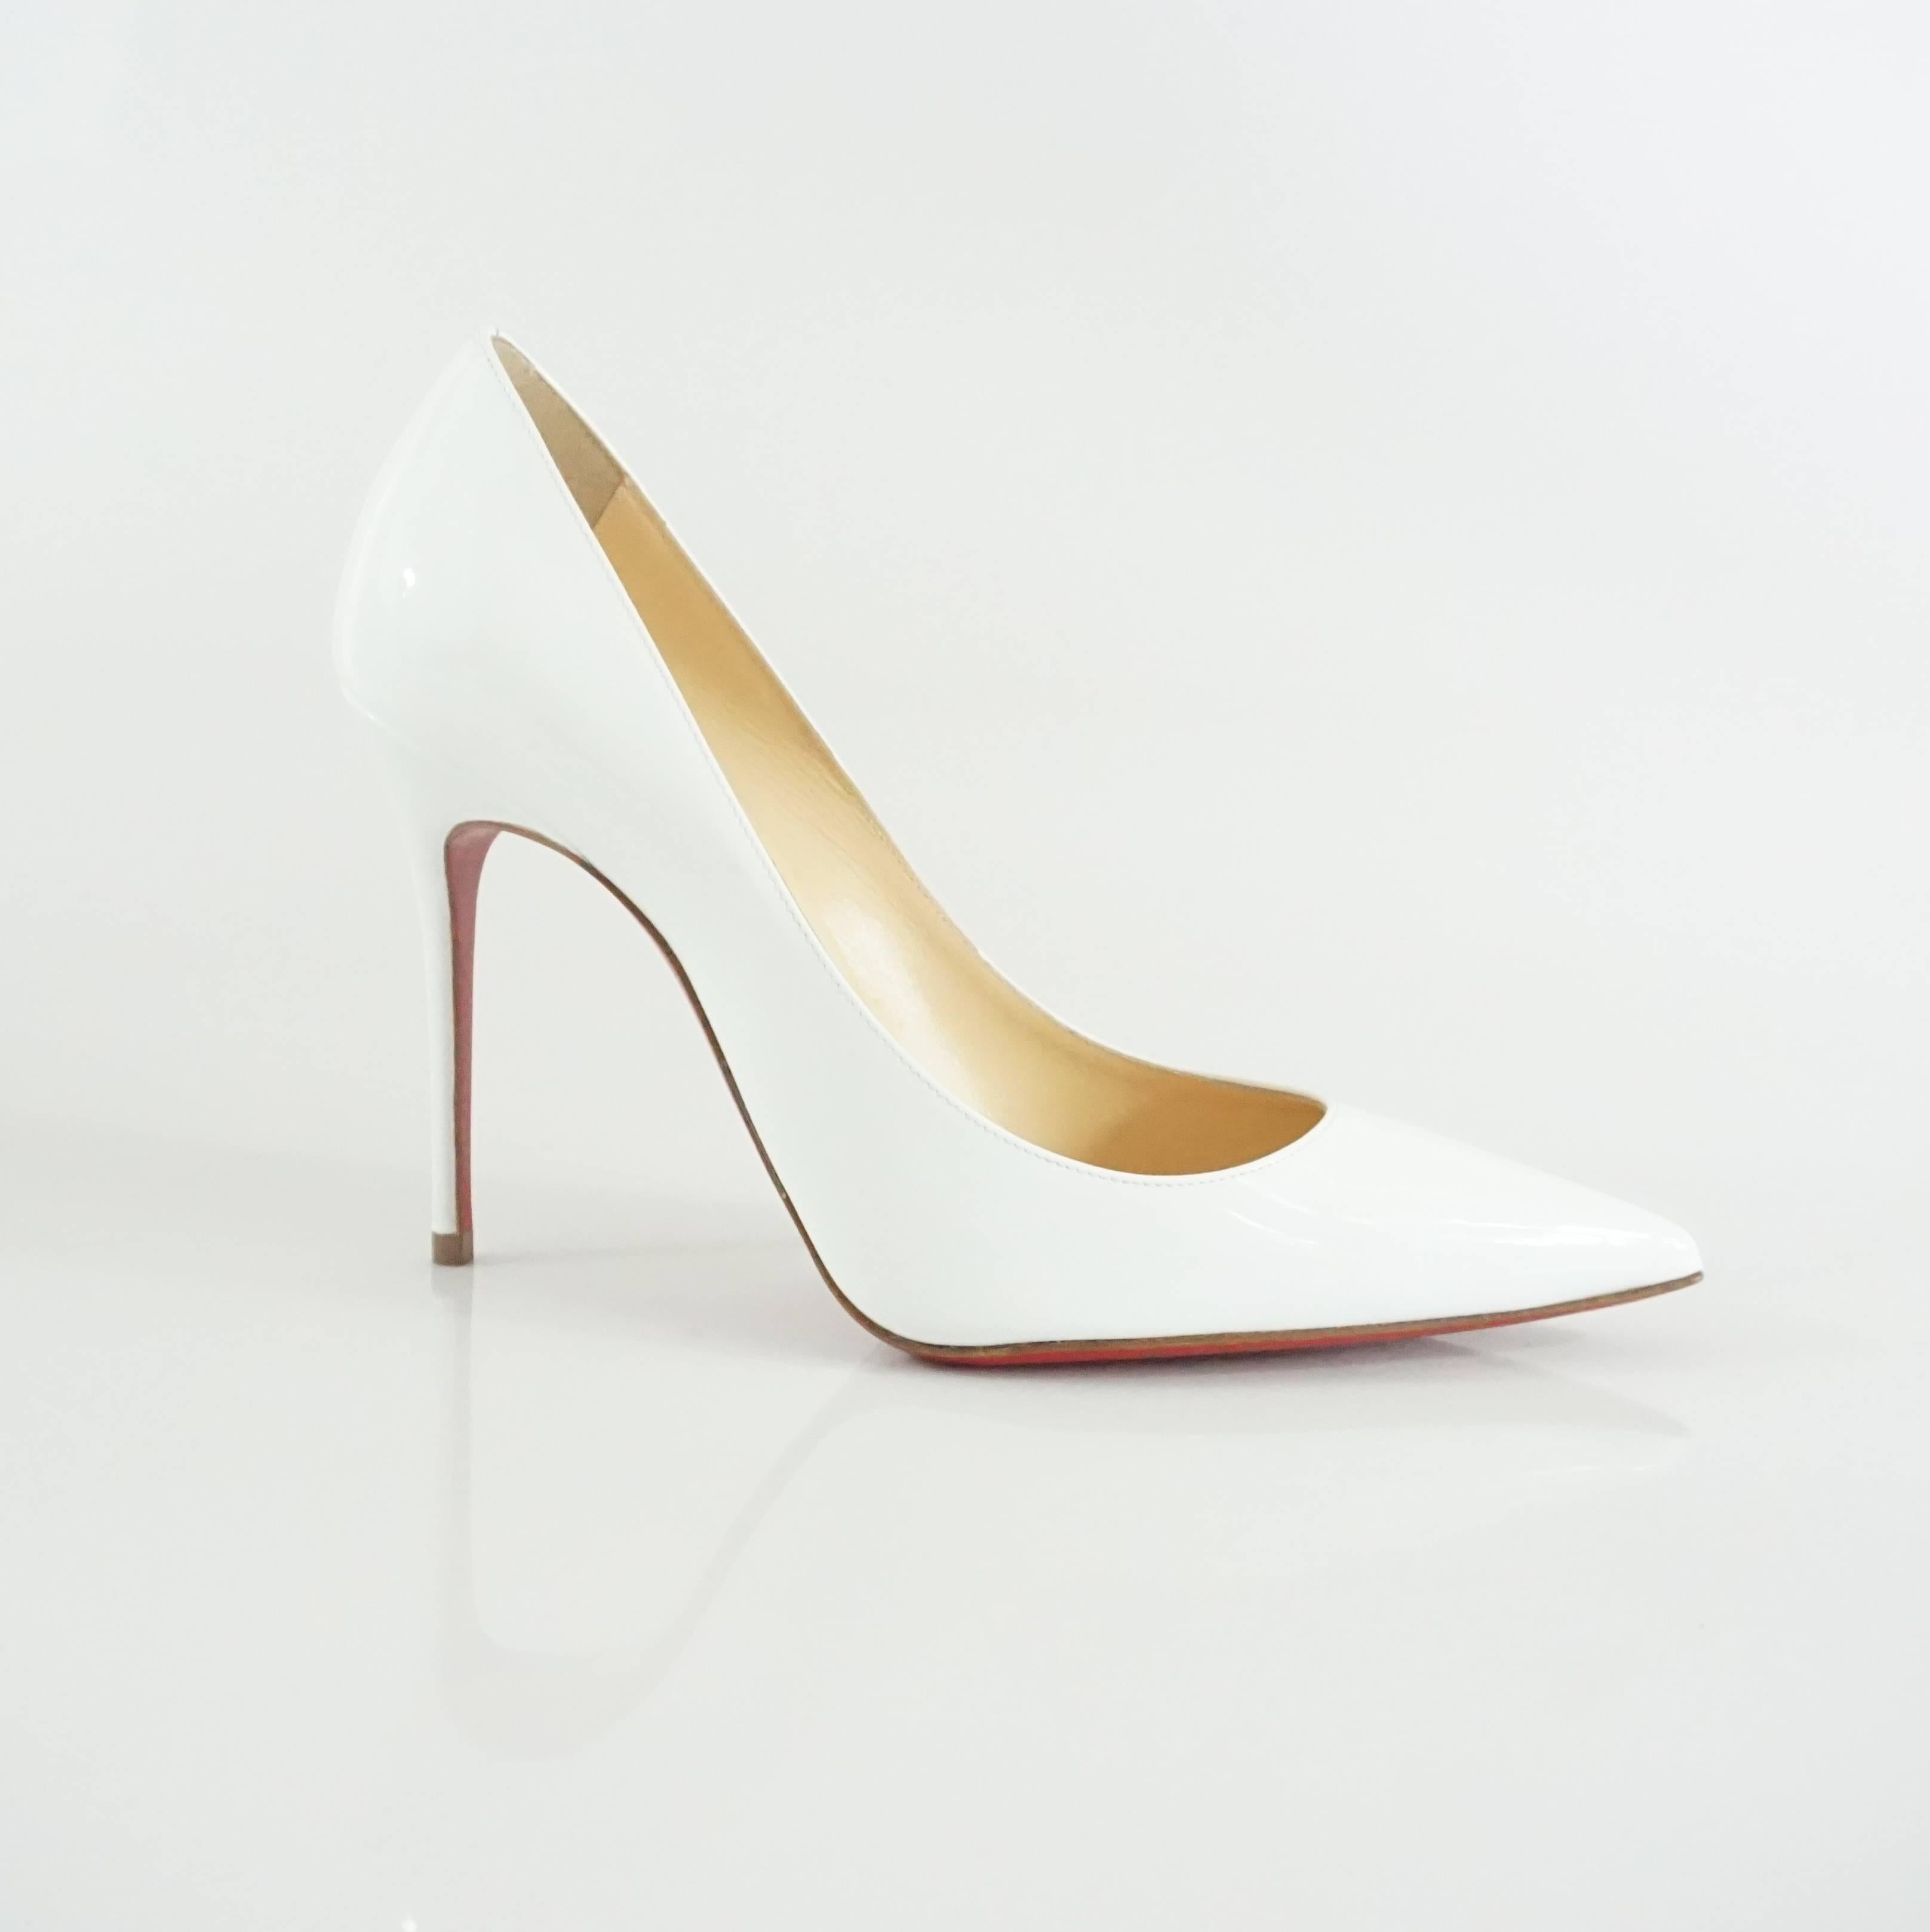 These Louboutin white patent pumps are  new and come with the original box and dusters. They are a sleek pointed toe style and perfect for any outfit. The heels are in excellent condition with a very small section with a scuff in the front of the